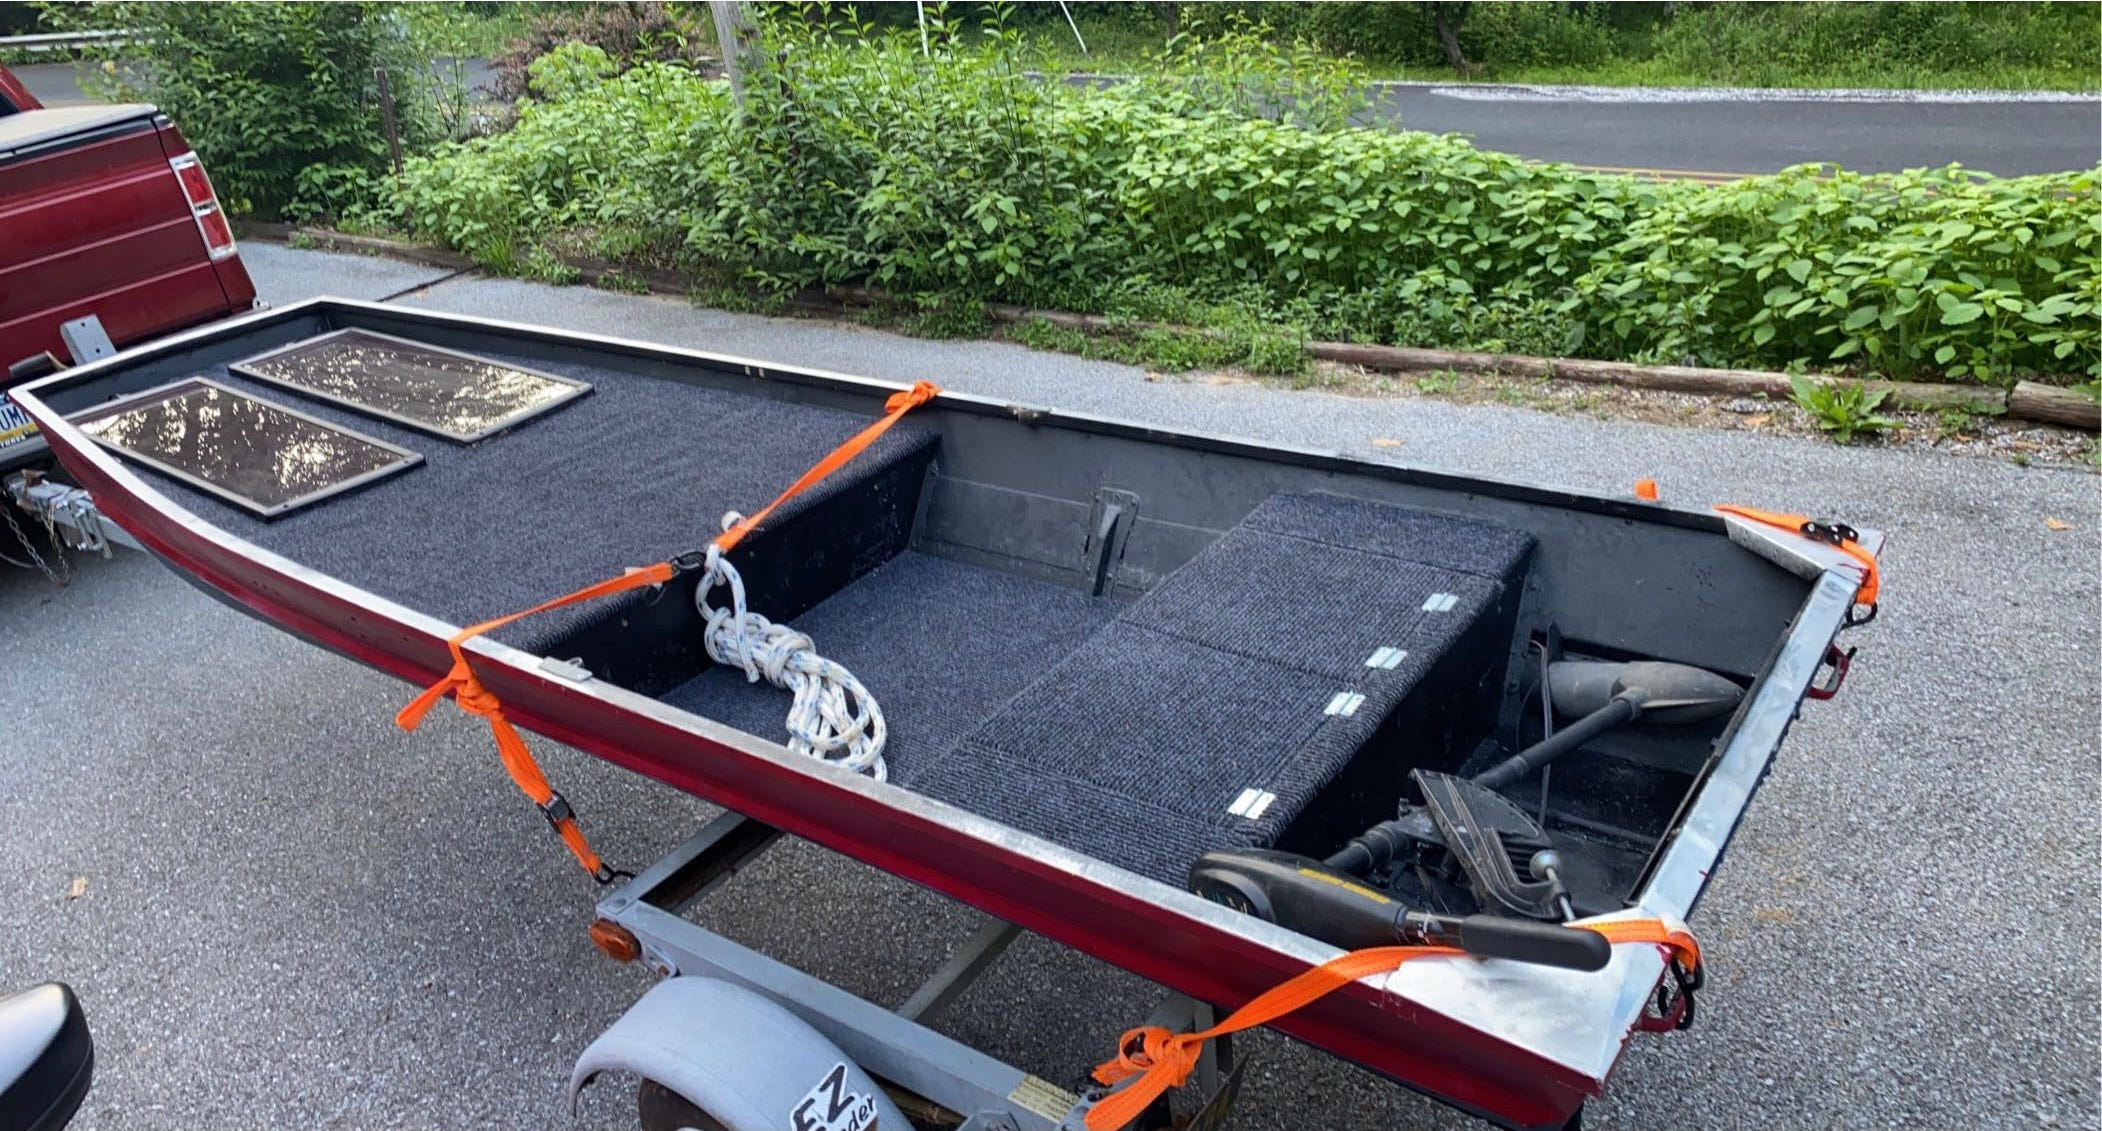 DIY Jon Boat Storage (Adding hatch lids to the benches and a drain plug) 